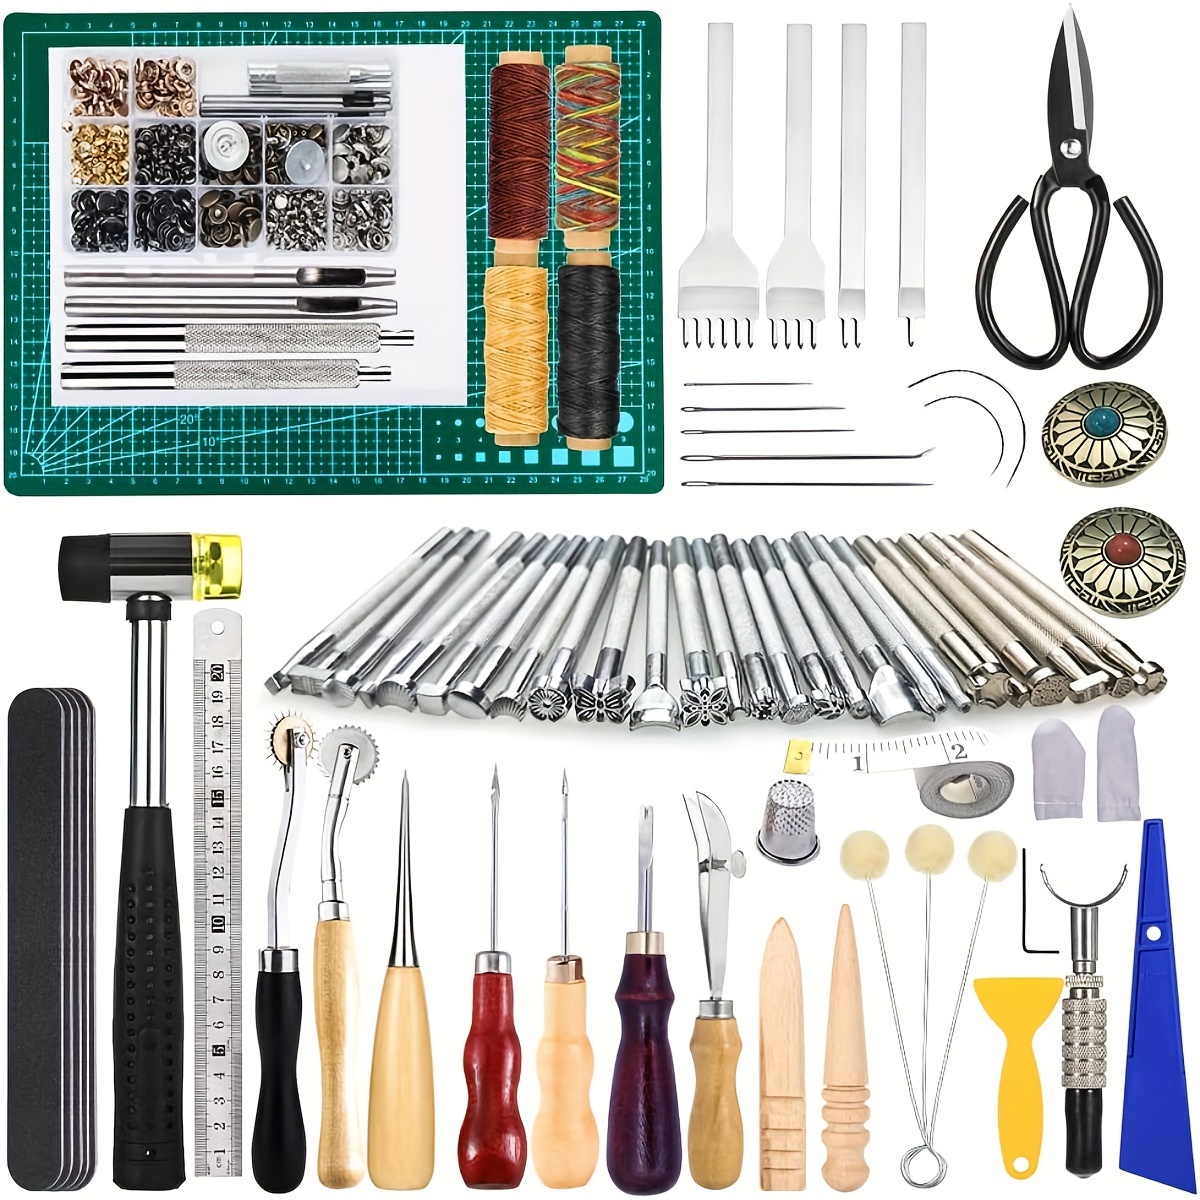  Leather Craft Tools Kit Leather Craft Making Leather Craft Hand  Tools Set Leather Working Tools Incl Nylon Hammer Waxed Thread Stitching  Groover Prong Punch Tools for DIY Leather Craft Making Sewing